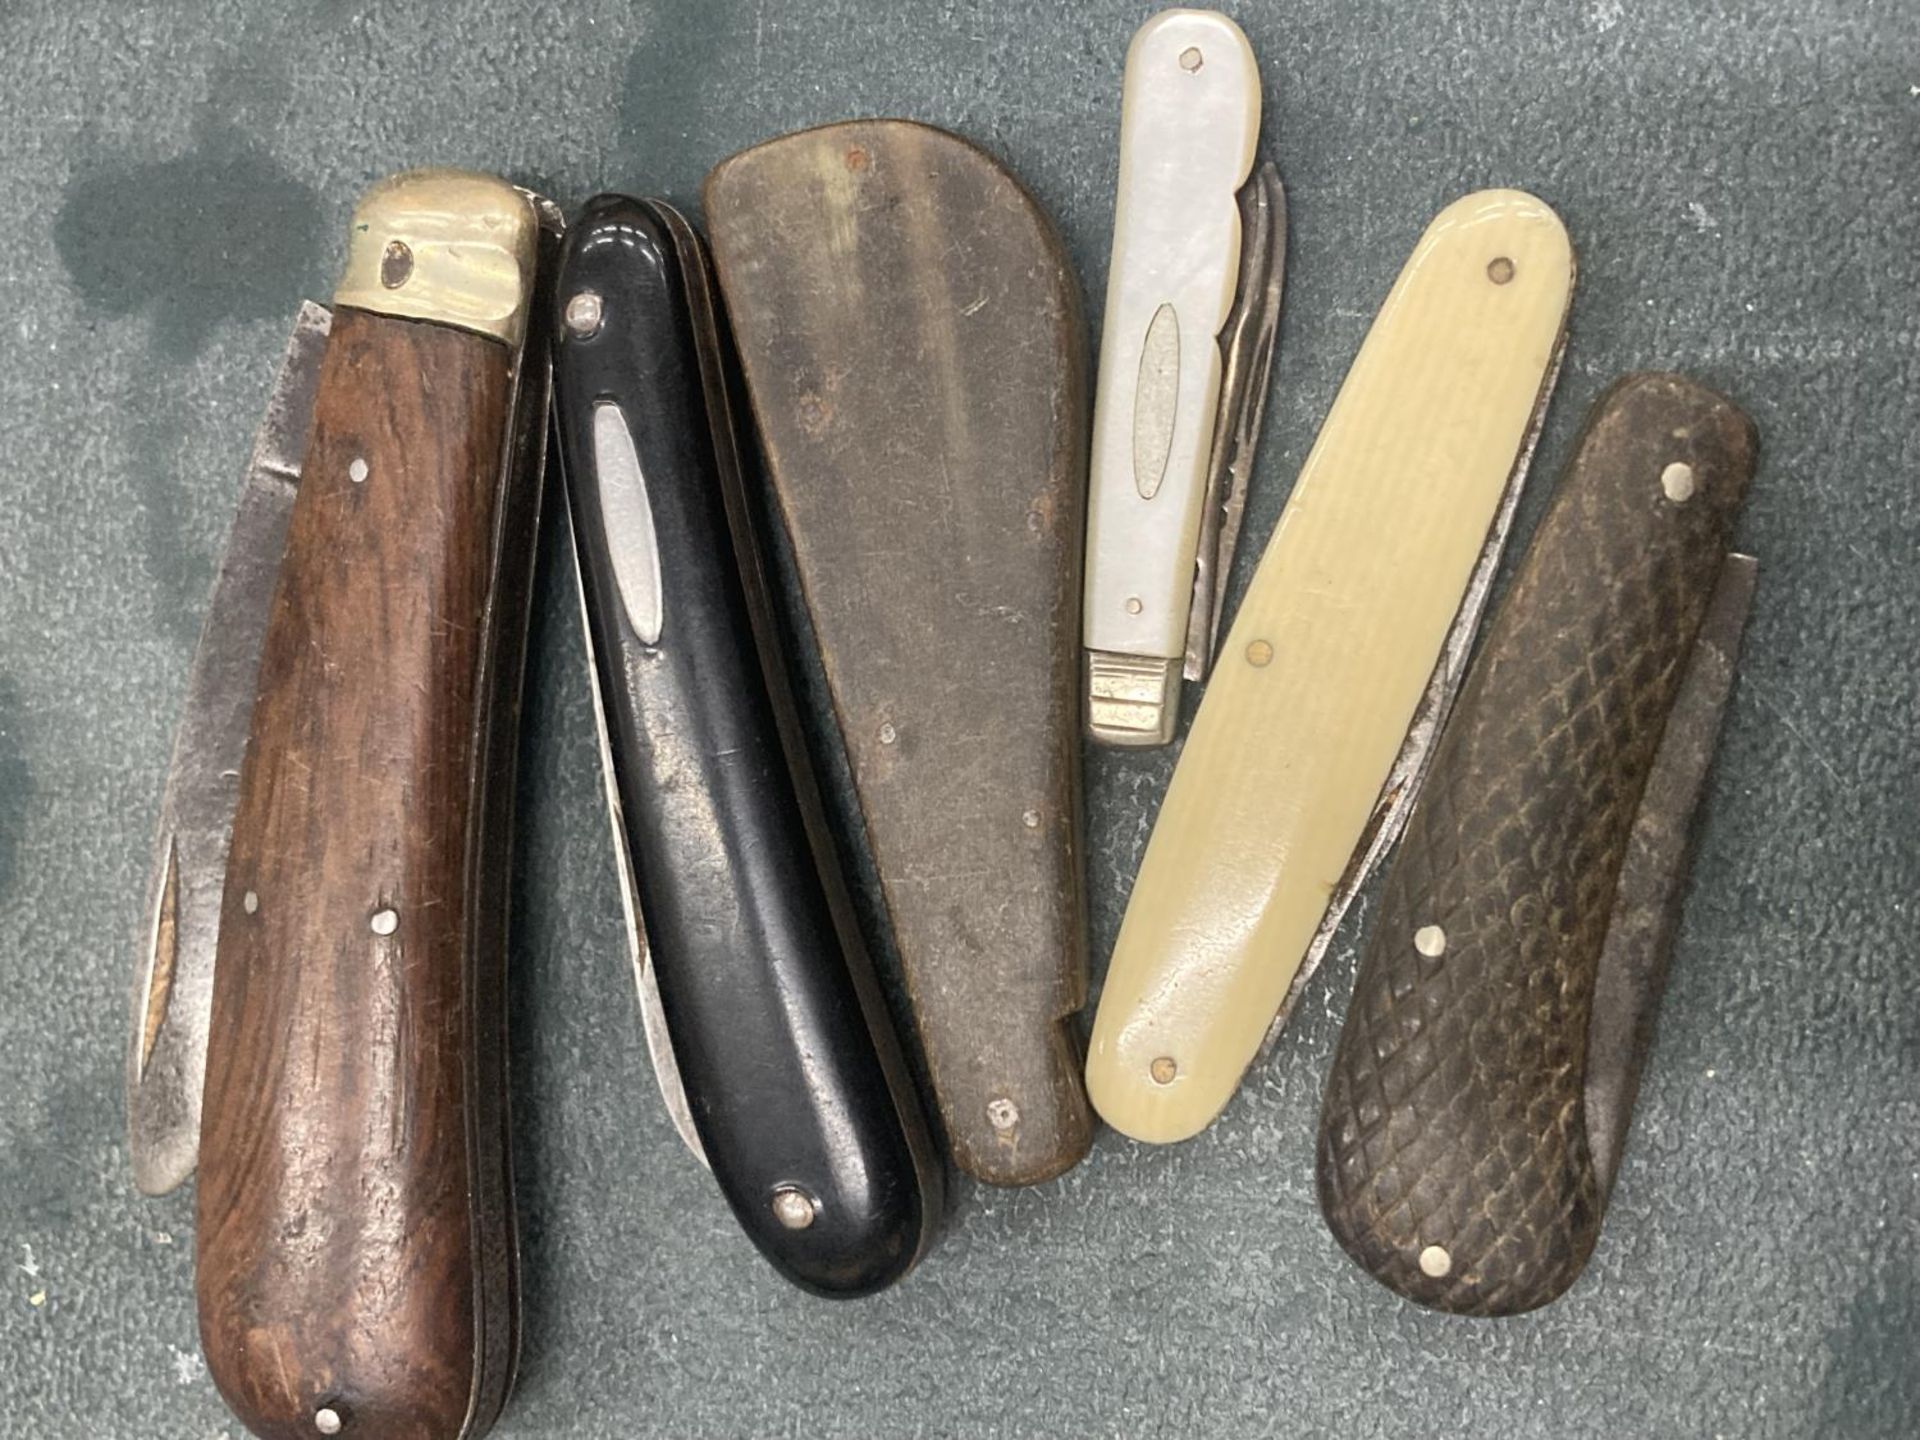 A COLLECTION OF VINTAGE PENKNIVES TO INCLUDE A LAMBSFOOT, A MOTHER OF PEARL FRUIT KNIFE WITH